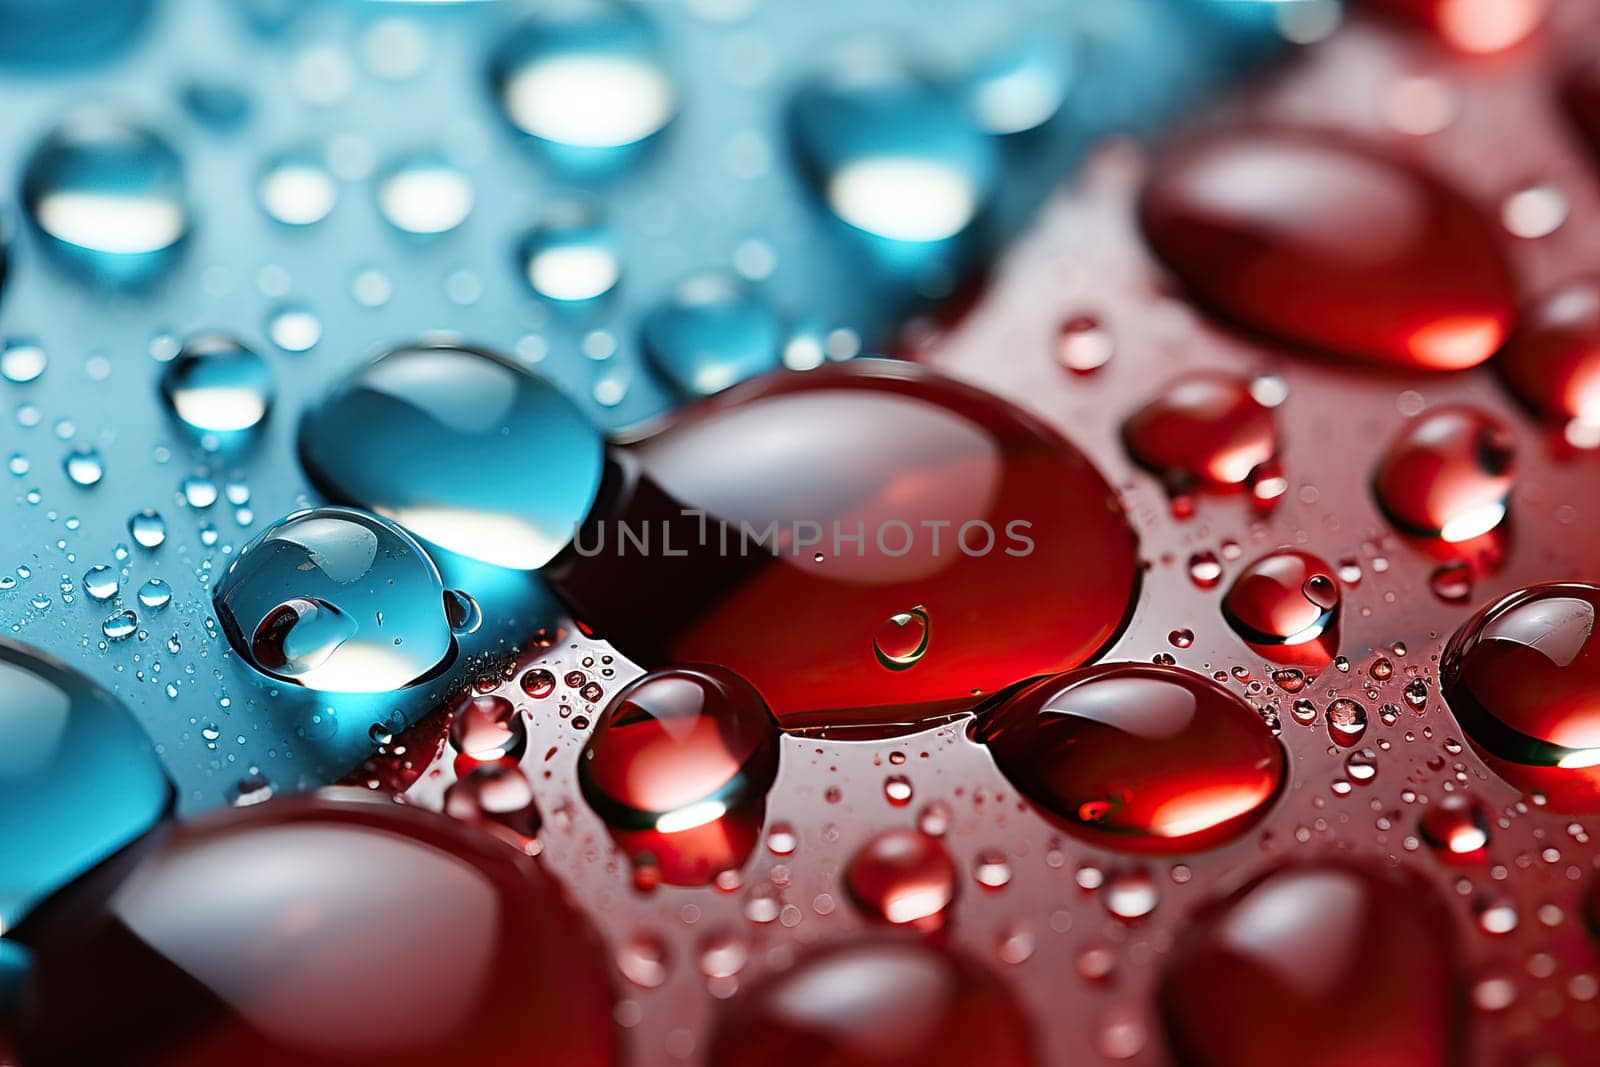 Water drops on a blue-red background, texture of water drops close-up on a blue and red background.